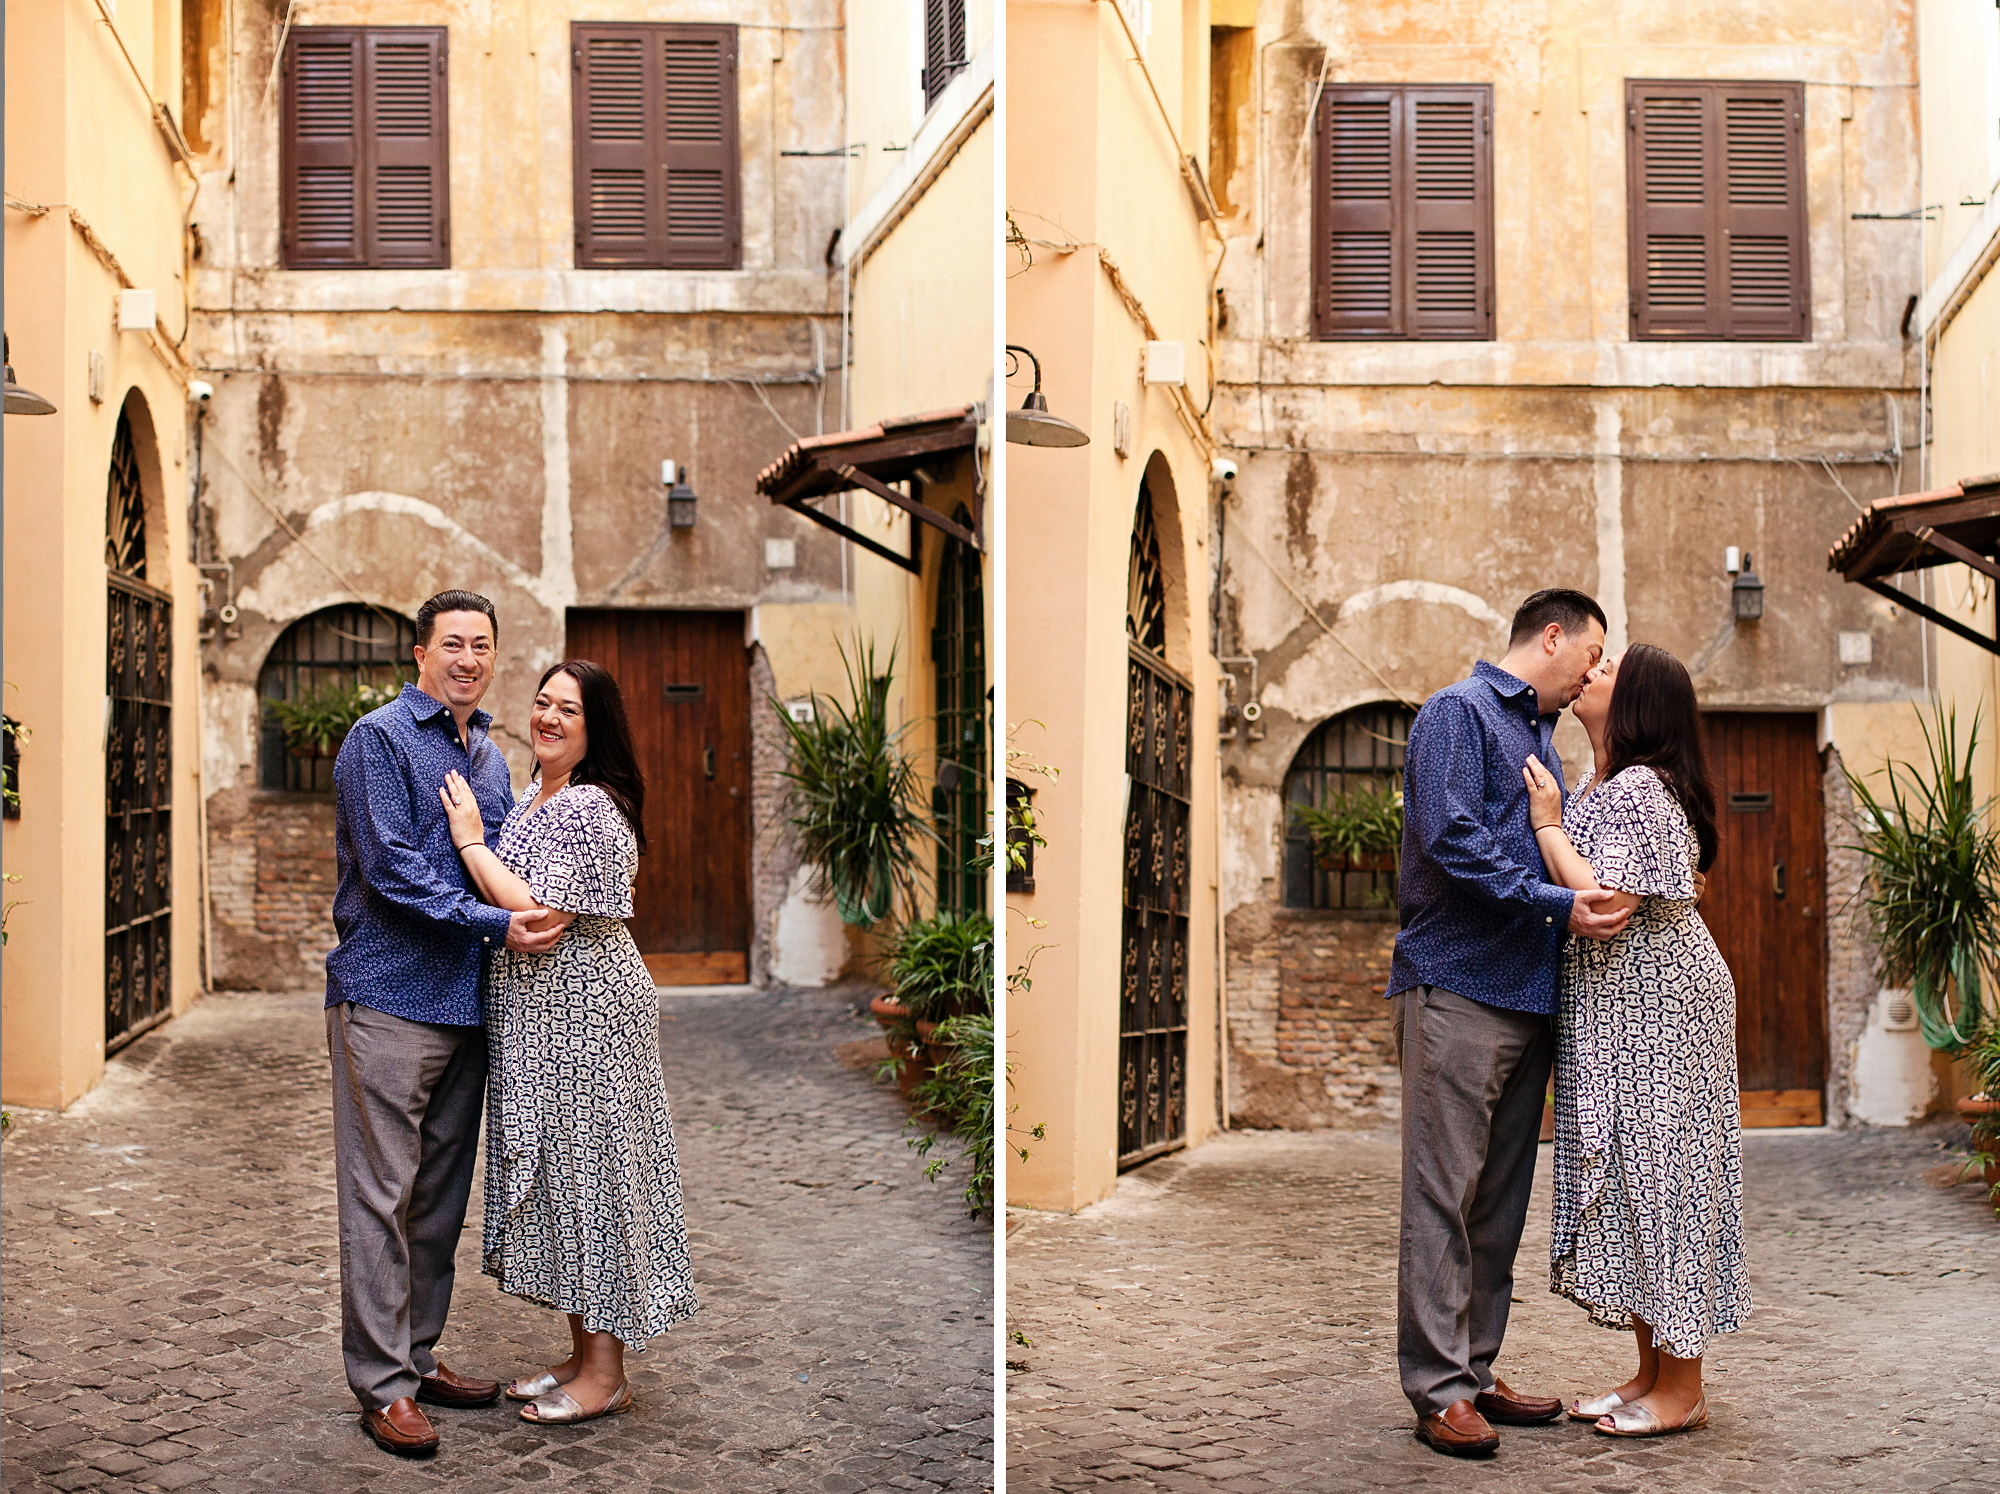 Honeymoon, vacation, family, engagement, maternity, wedding, love story individual and solo photoshoots in Rome, Italy by photographer Tricia Anne Photography | Rome Photographer, vacation, tripadvisor, instagram, fun, married, bride, groom, love story, photography session rome, photoshoot rome, wedding photographer, vacation photographer, Trastevere Photoshoot, English speaking photographer in Rome